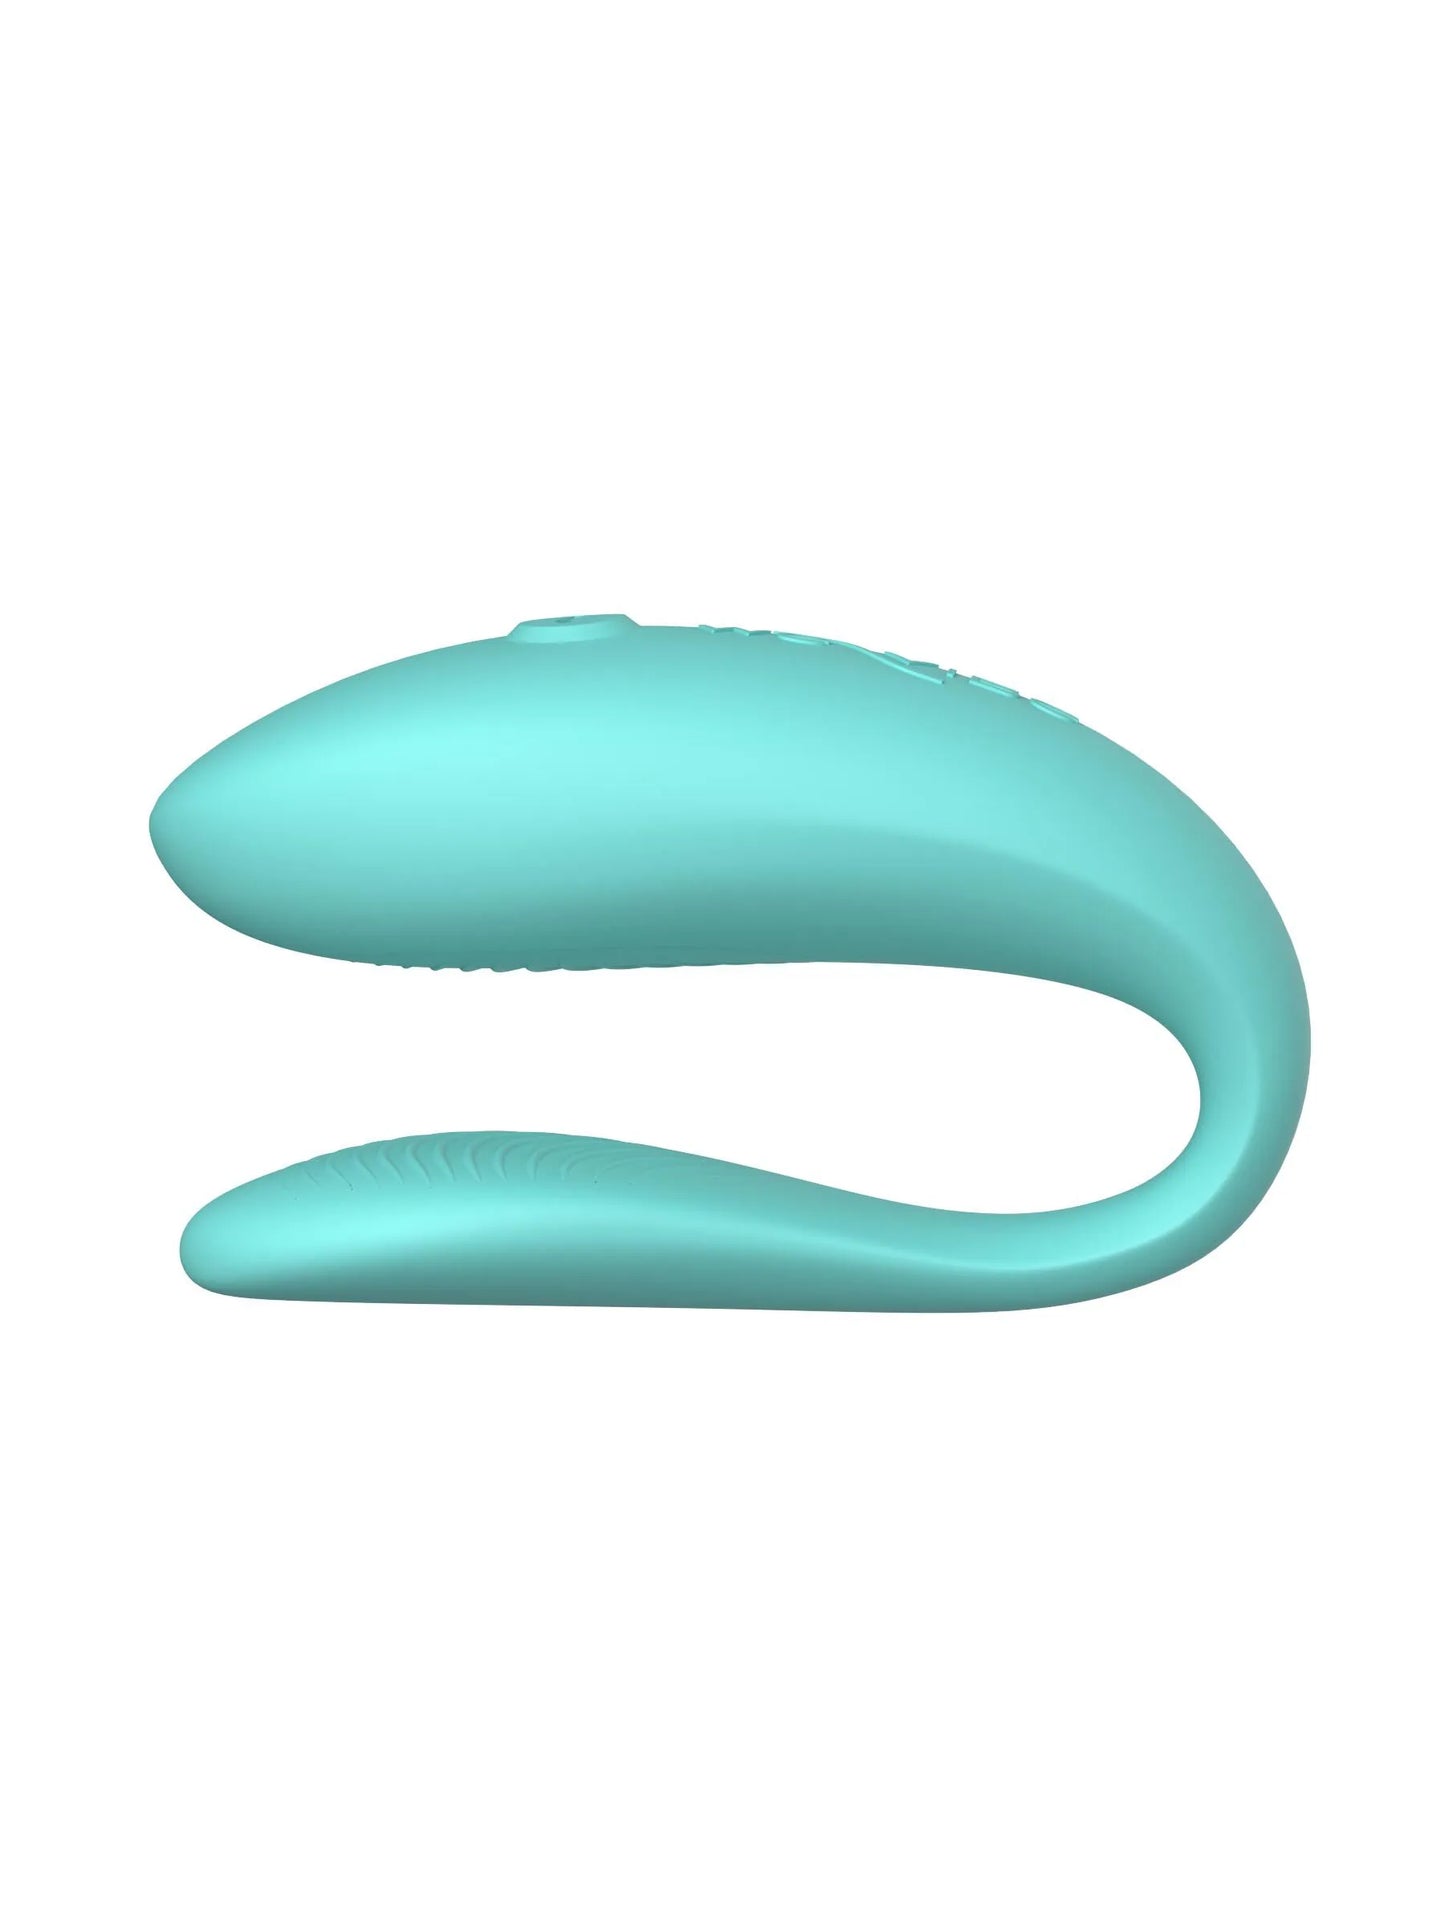 We Vibe Sync Lite Couples Vibrator From Ann Summers, Image 06